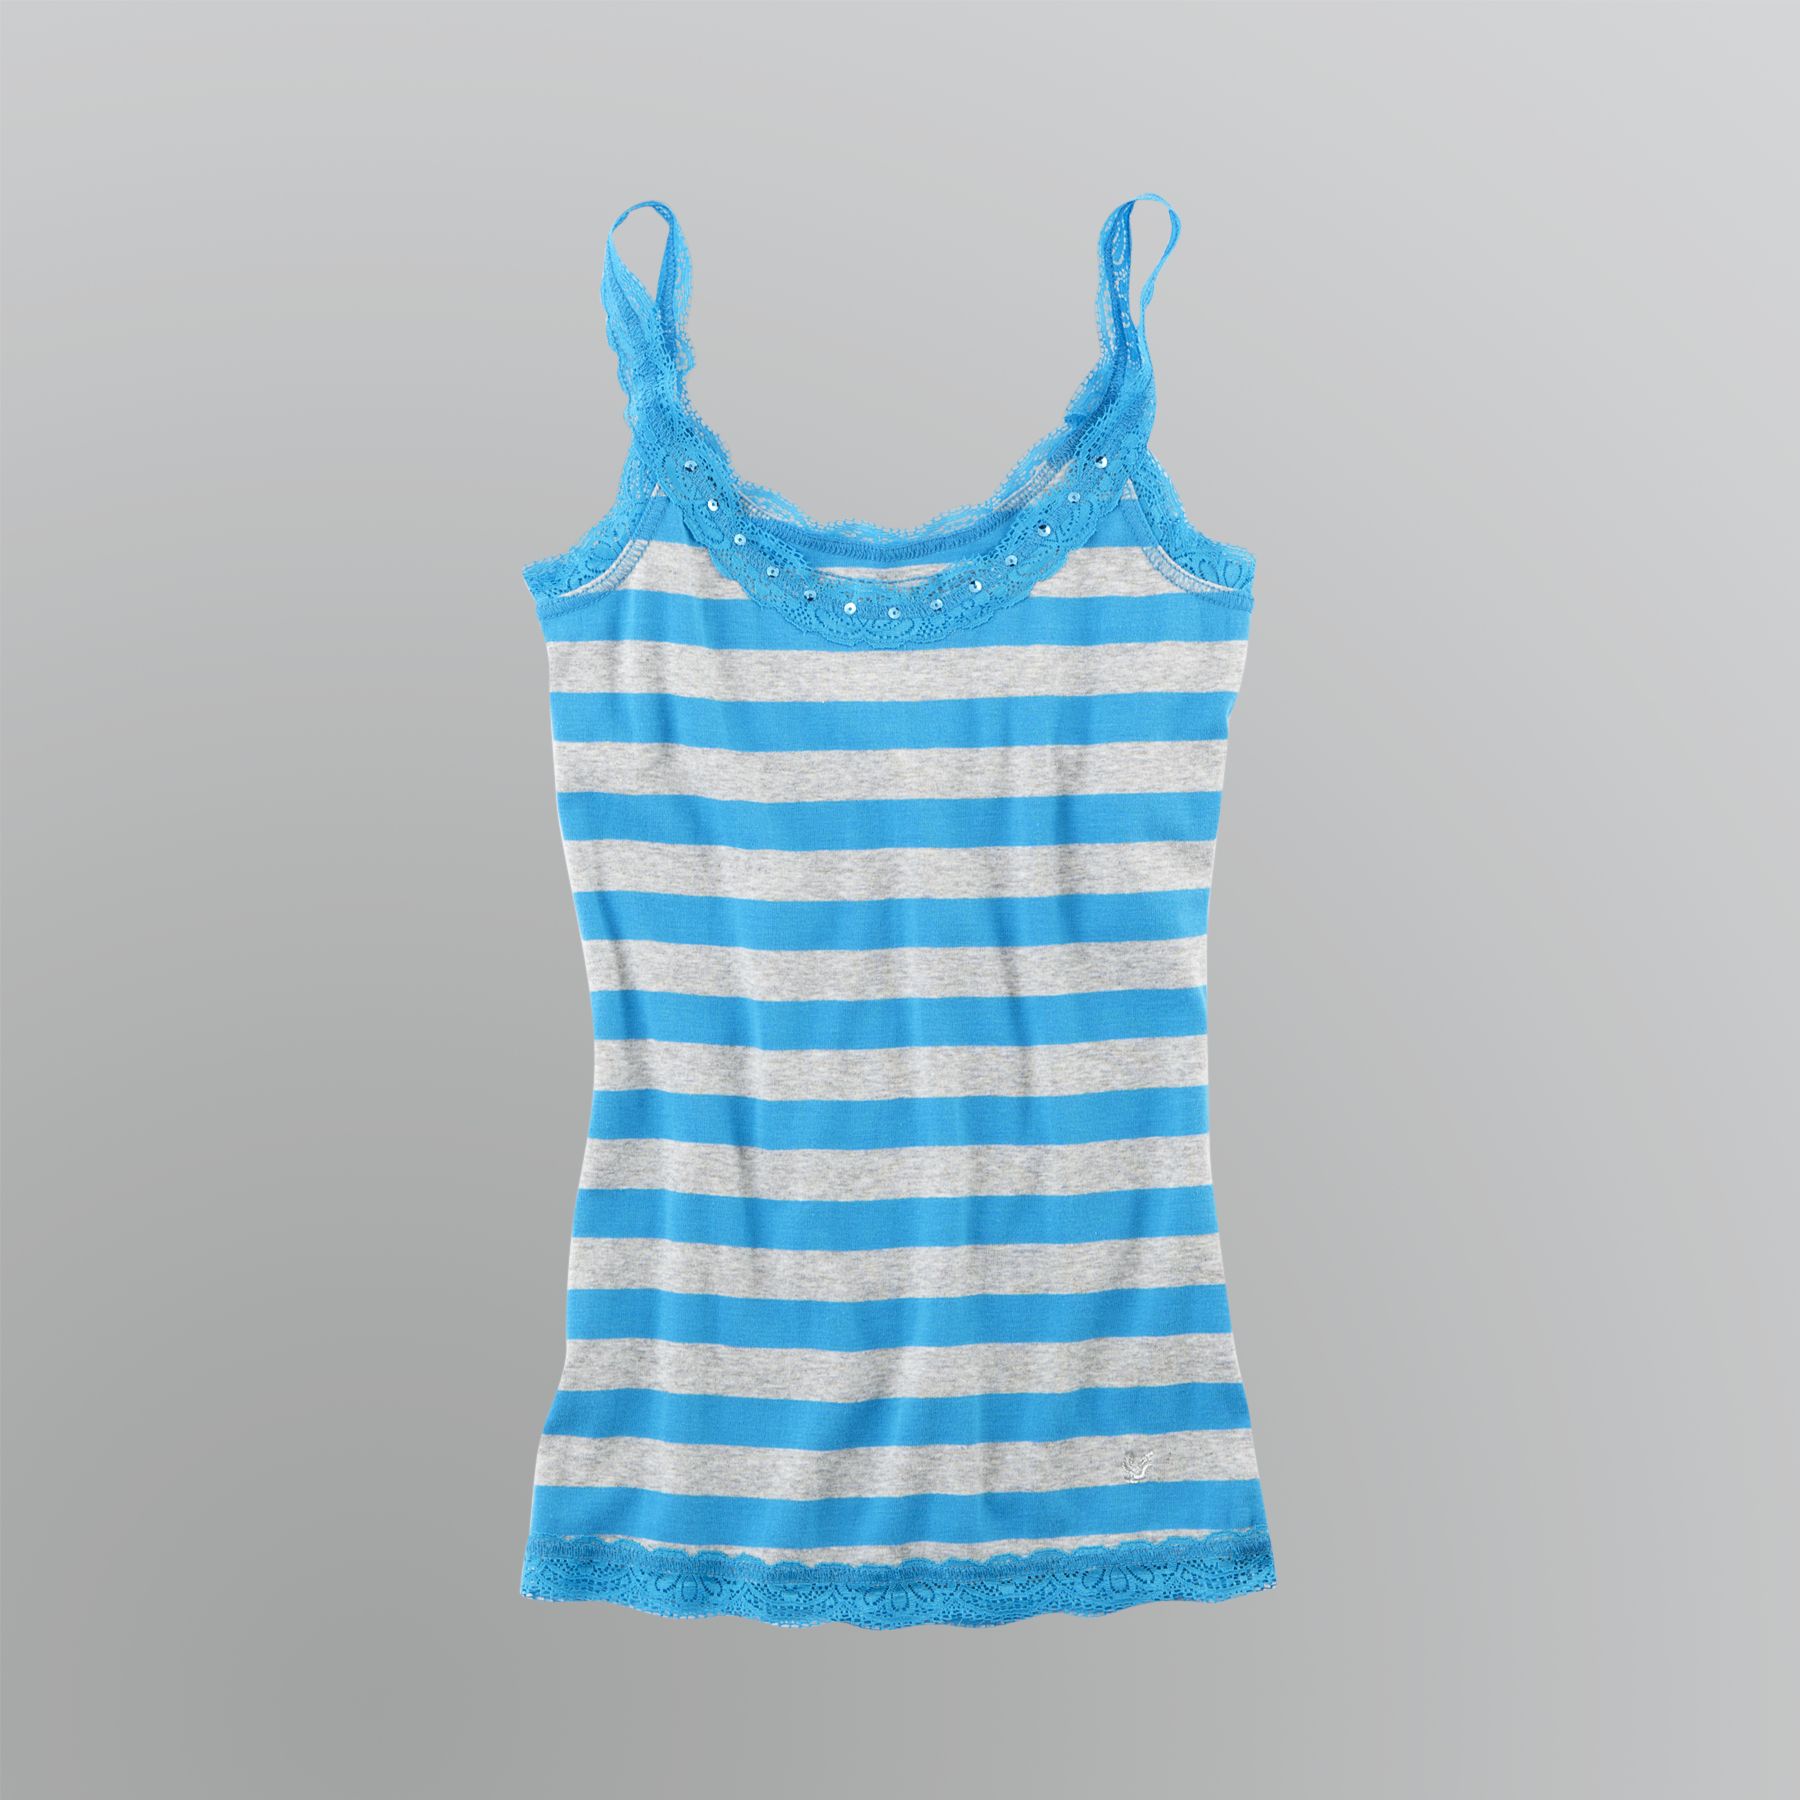 Junior's Lined Lace Tank